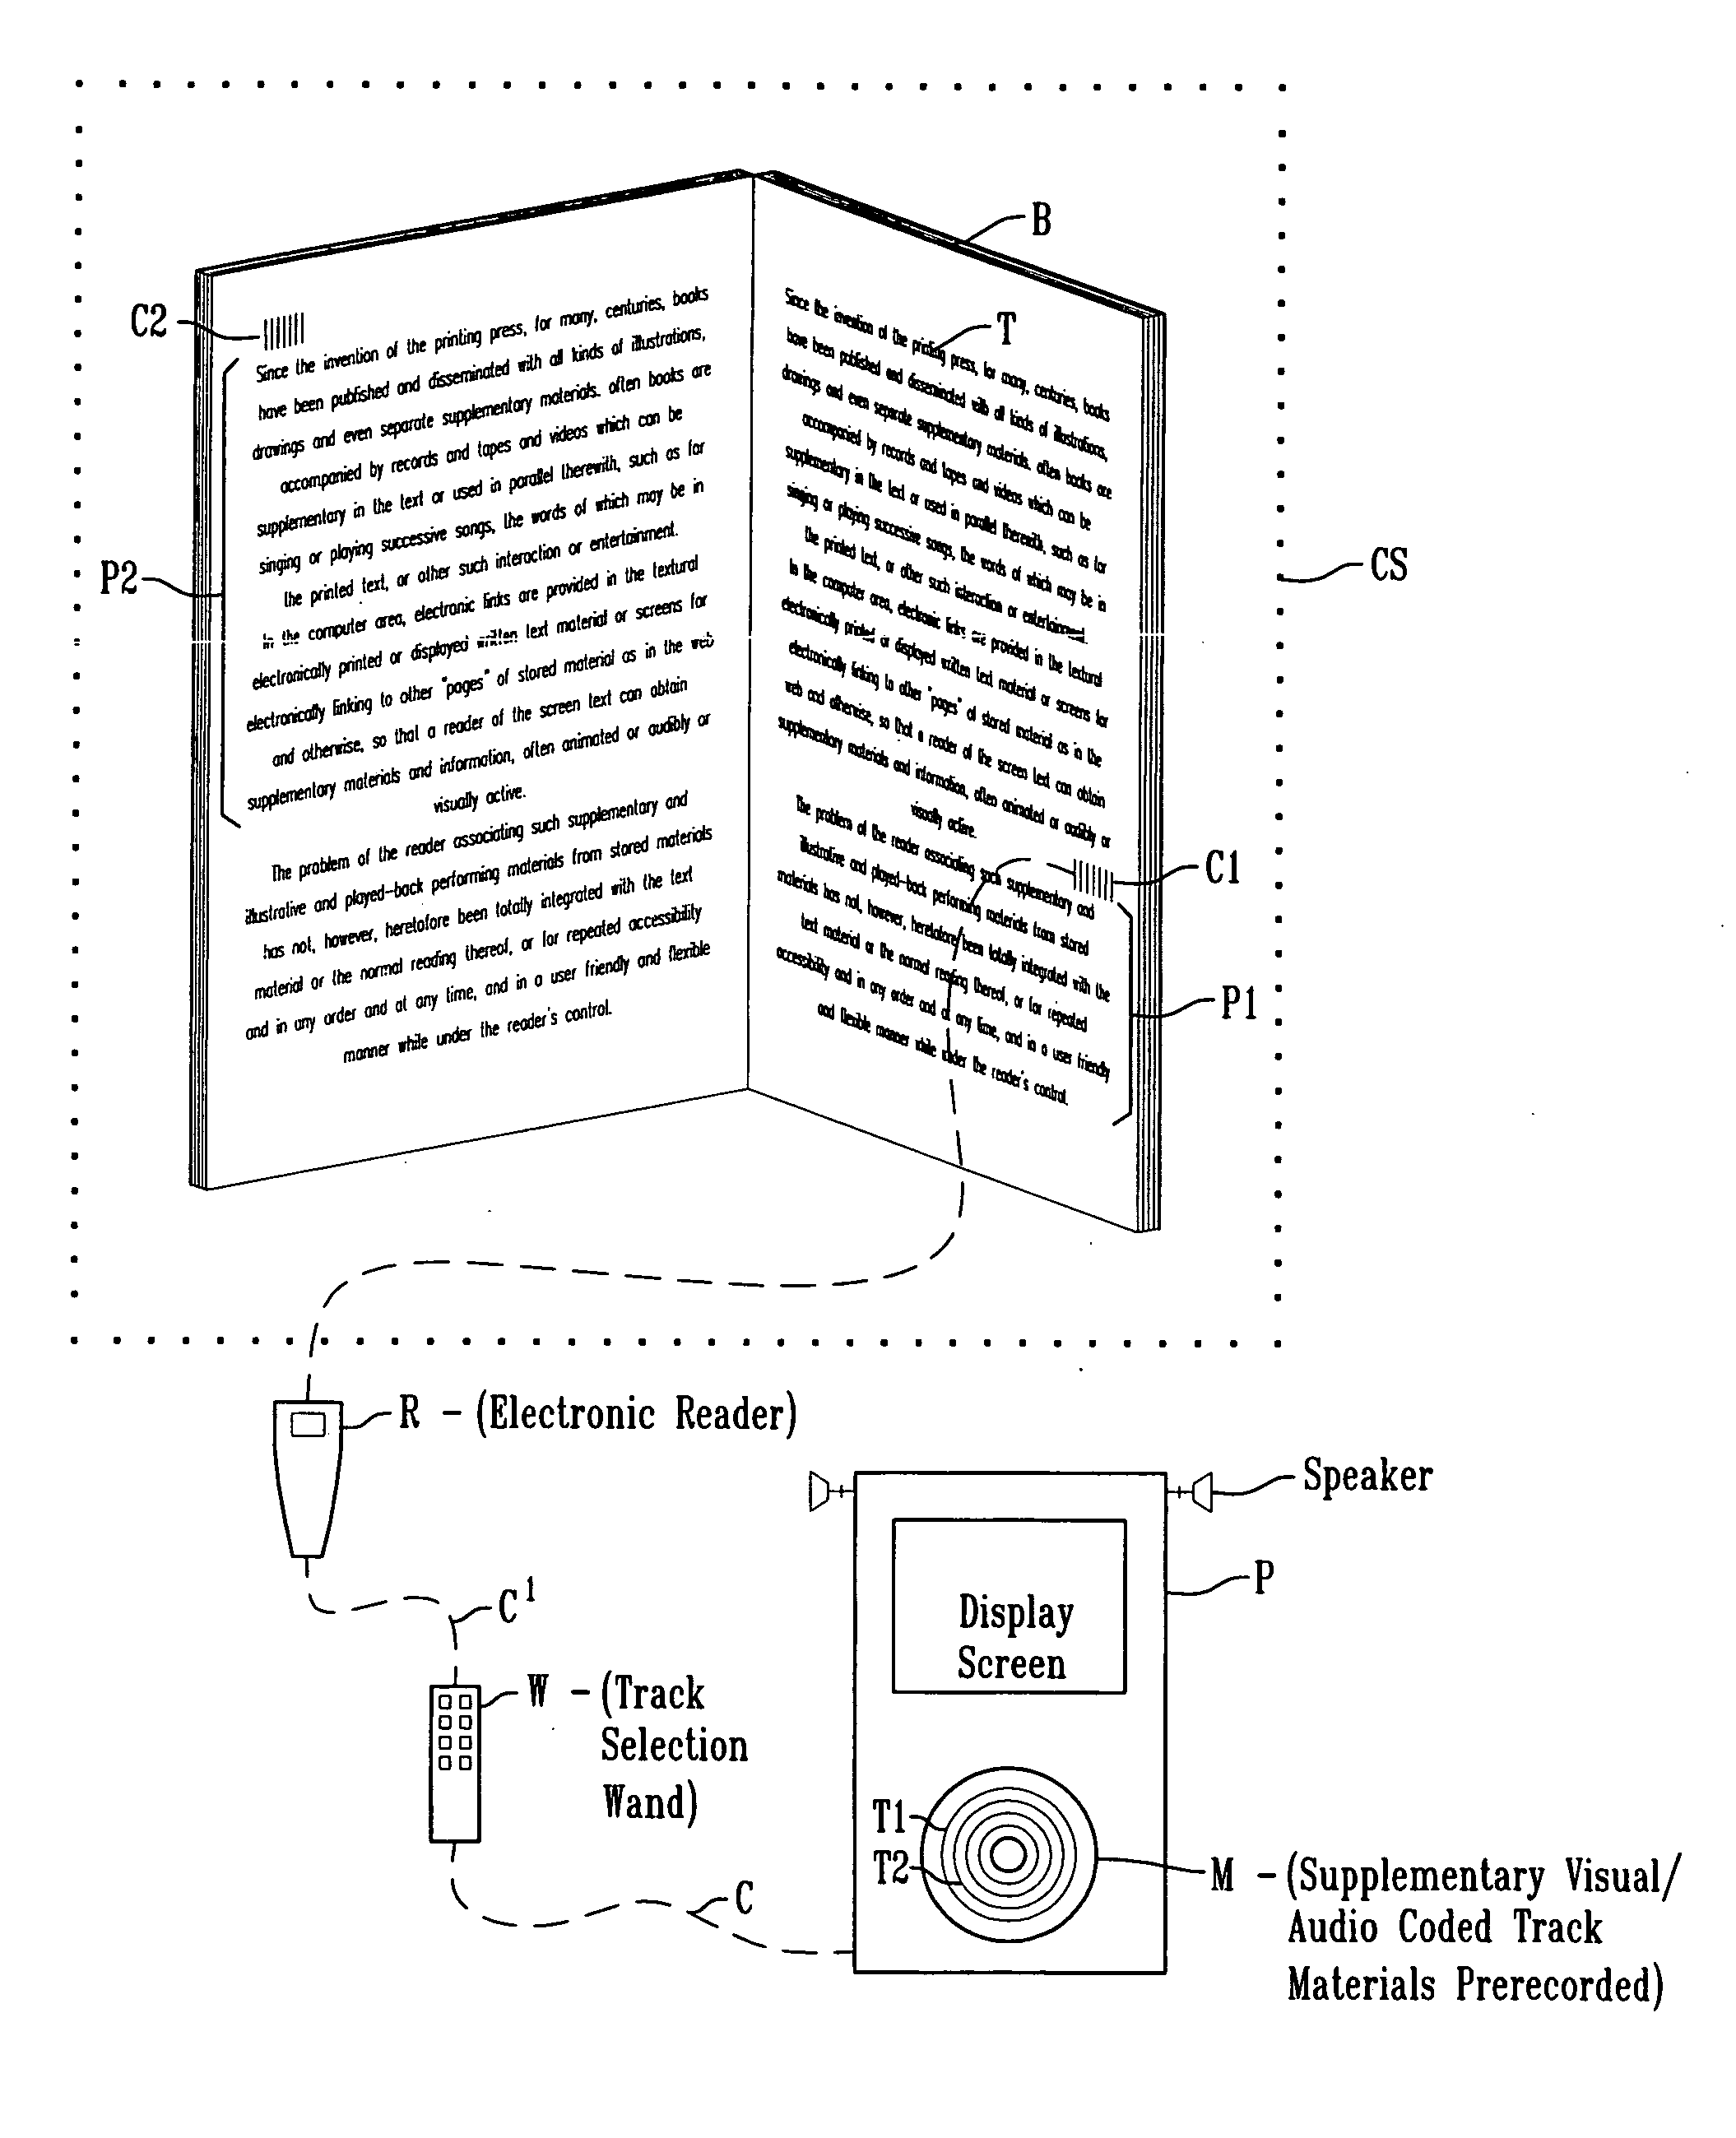 Method and apparatus for supplementing the reading of selected passages of printed material in a book or the like by electronically reading coded indicia provided in the book at such passages to access the playing of corresponding coded tracks of pre-recorded video/audio supplemental material respectively related to the selected passages